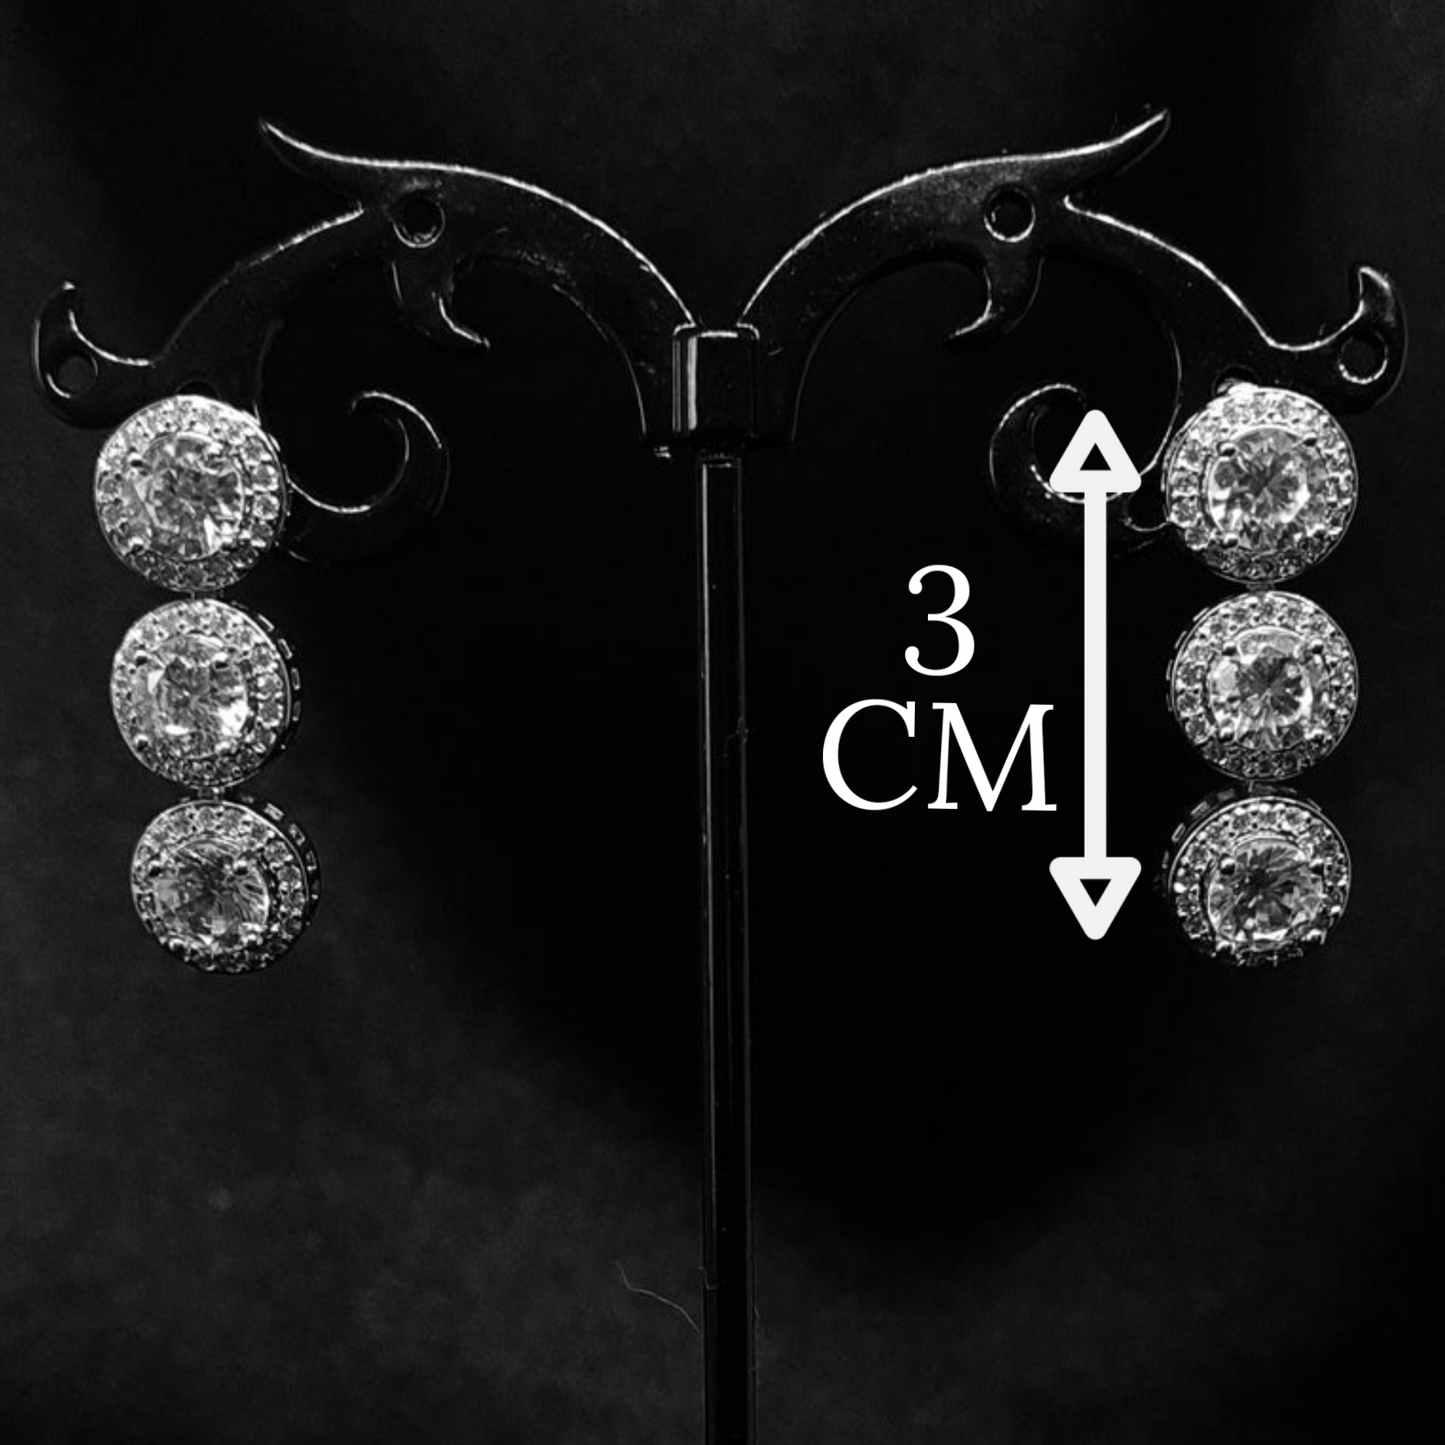 A pair of dangle earrings made of cubic zirconia. The earrings are round-shaped and have a simple, elegant design. The cubic zirconia stones are clear and sparkling. The earrings are hanging from a black metal wire. with measure.